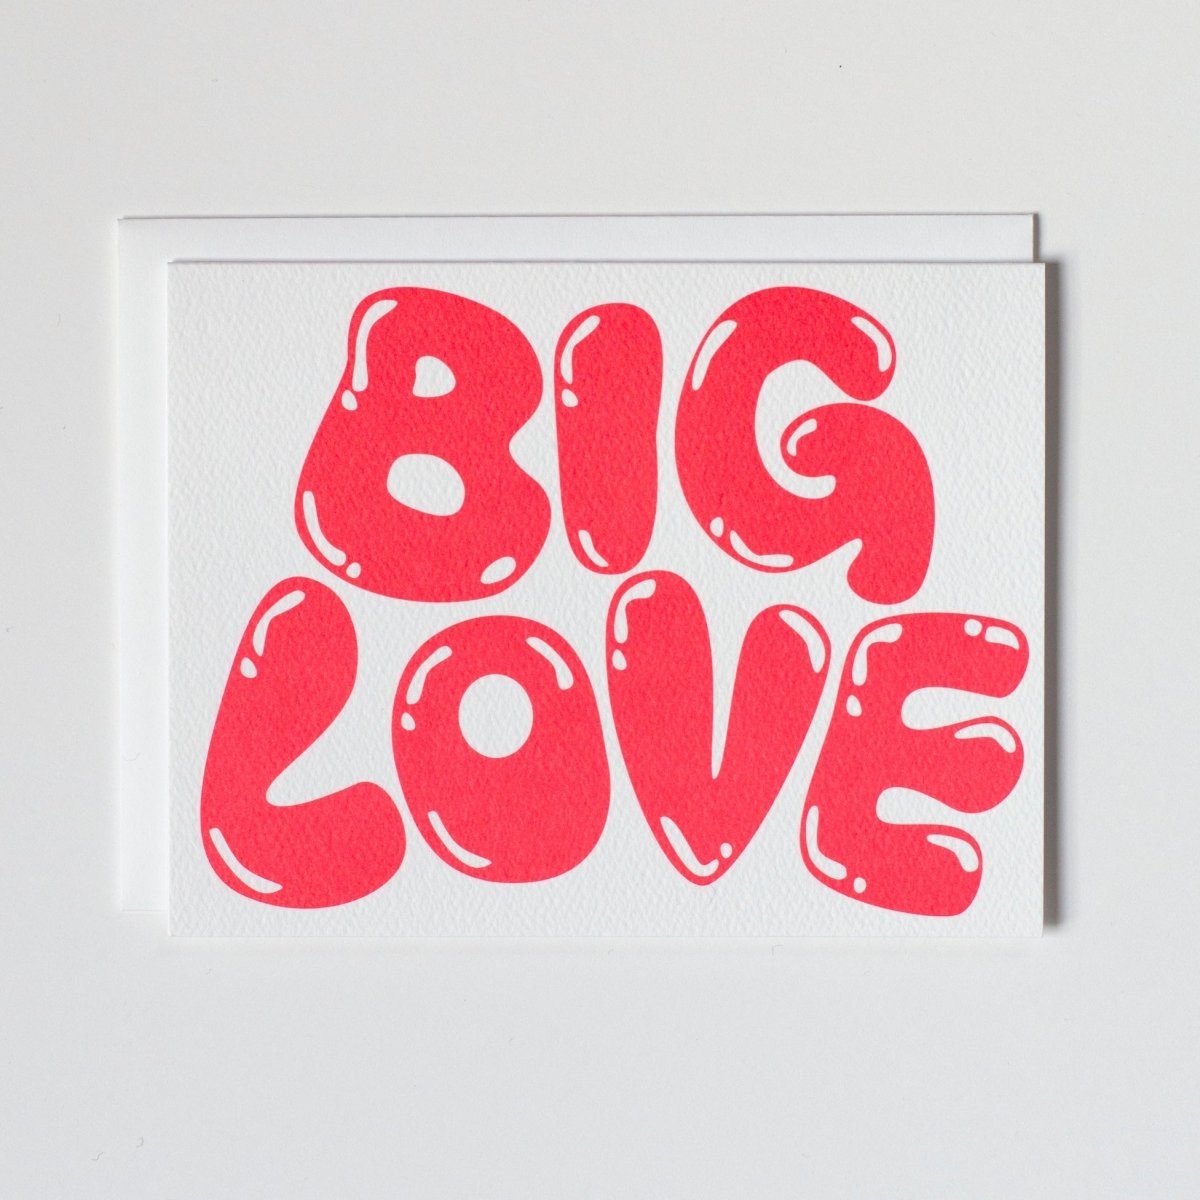 A white greeting card with red/pink bubble letters. Front of card reads: "BIG LOVE." Made with recycled paper by Banquet Atelier in Vancouver, British Columbia, Canada.